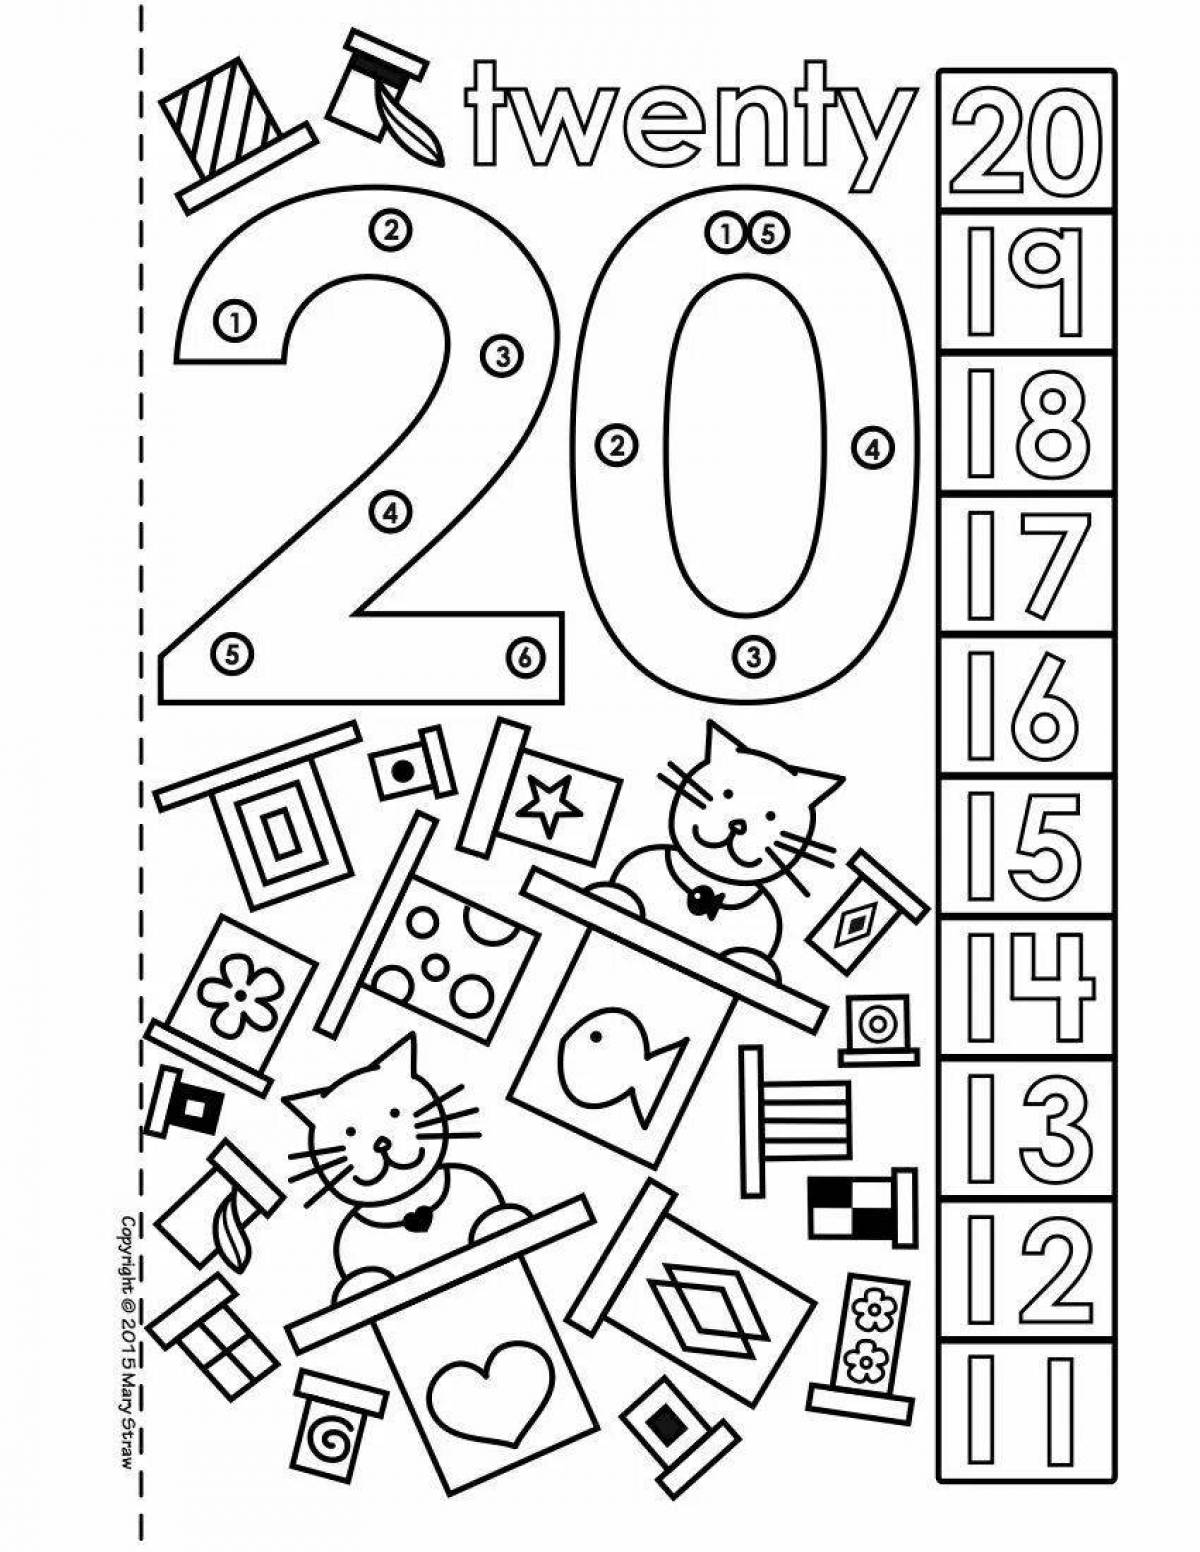 Charming coloring page 20